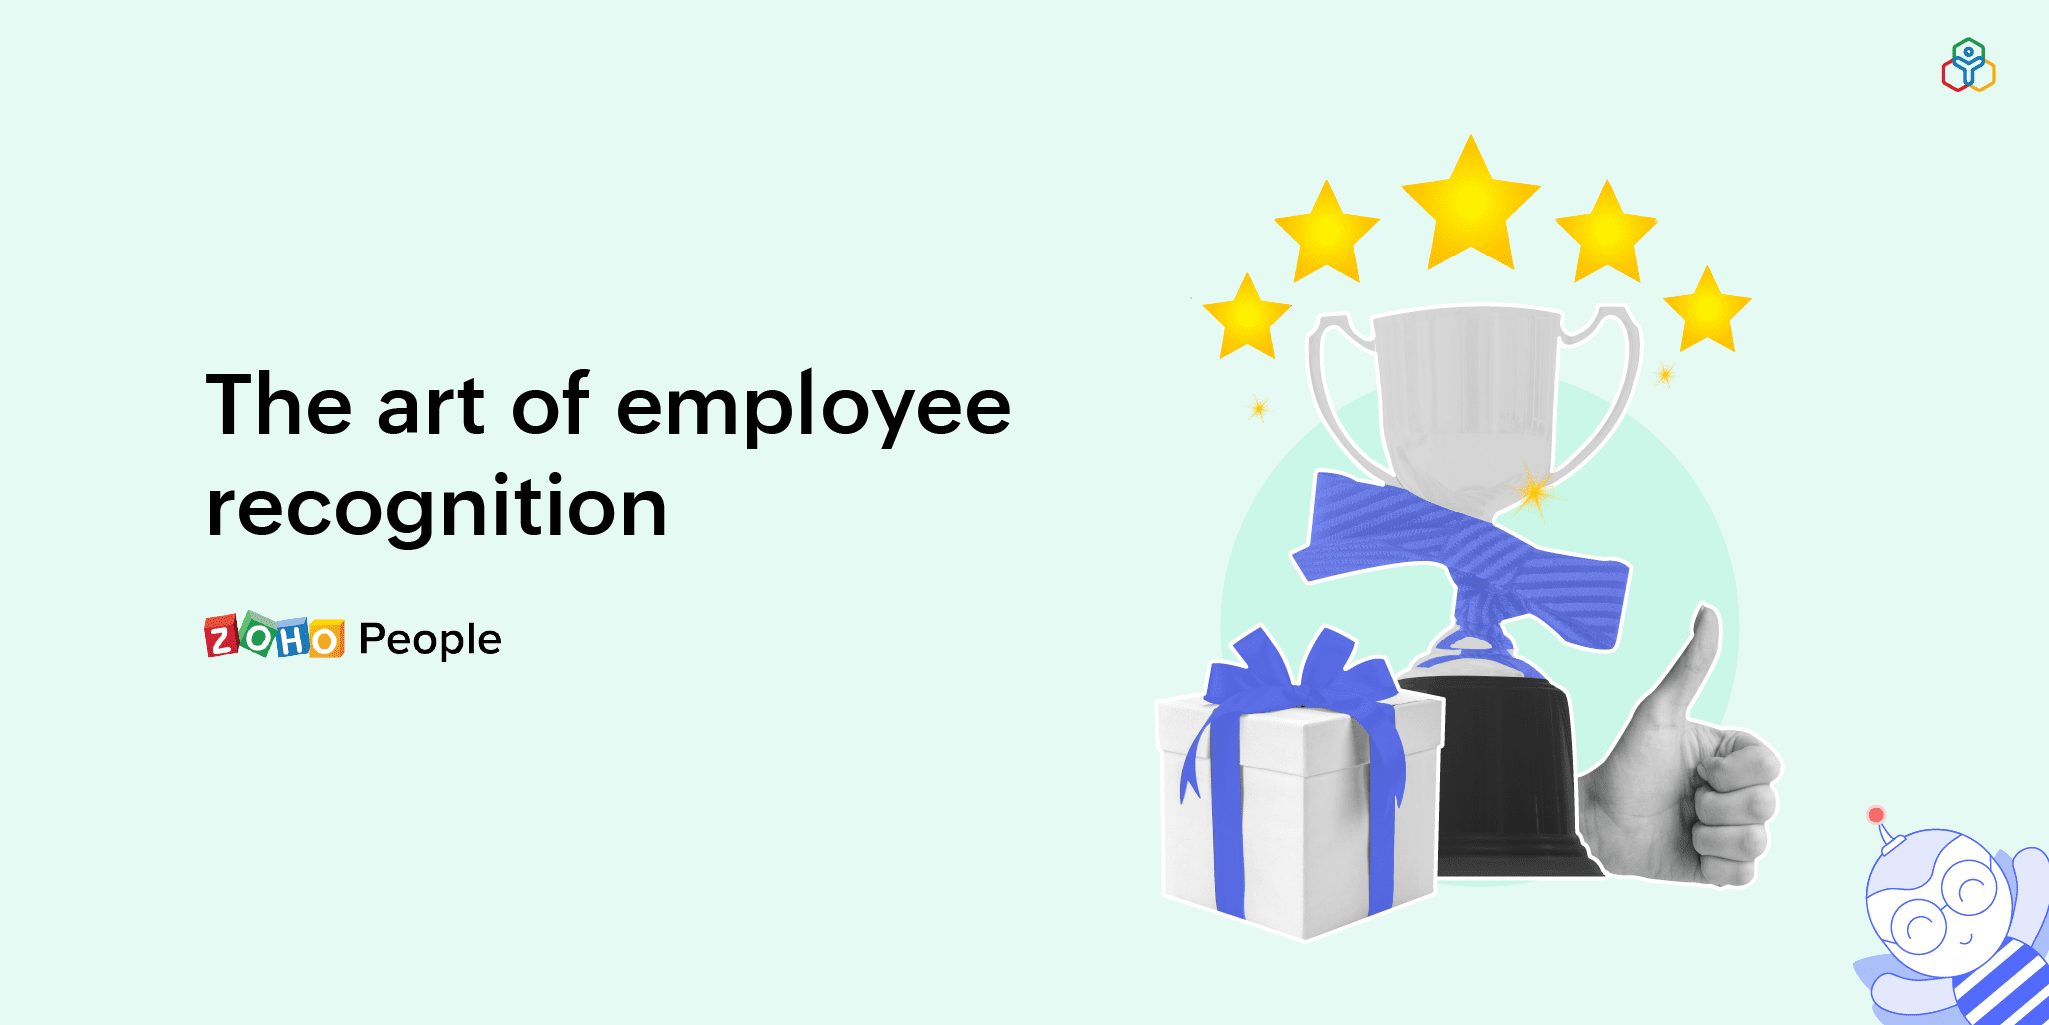 How to master the art of employee recognition